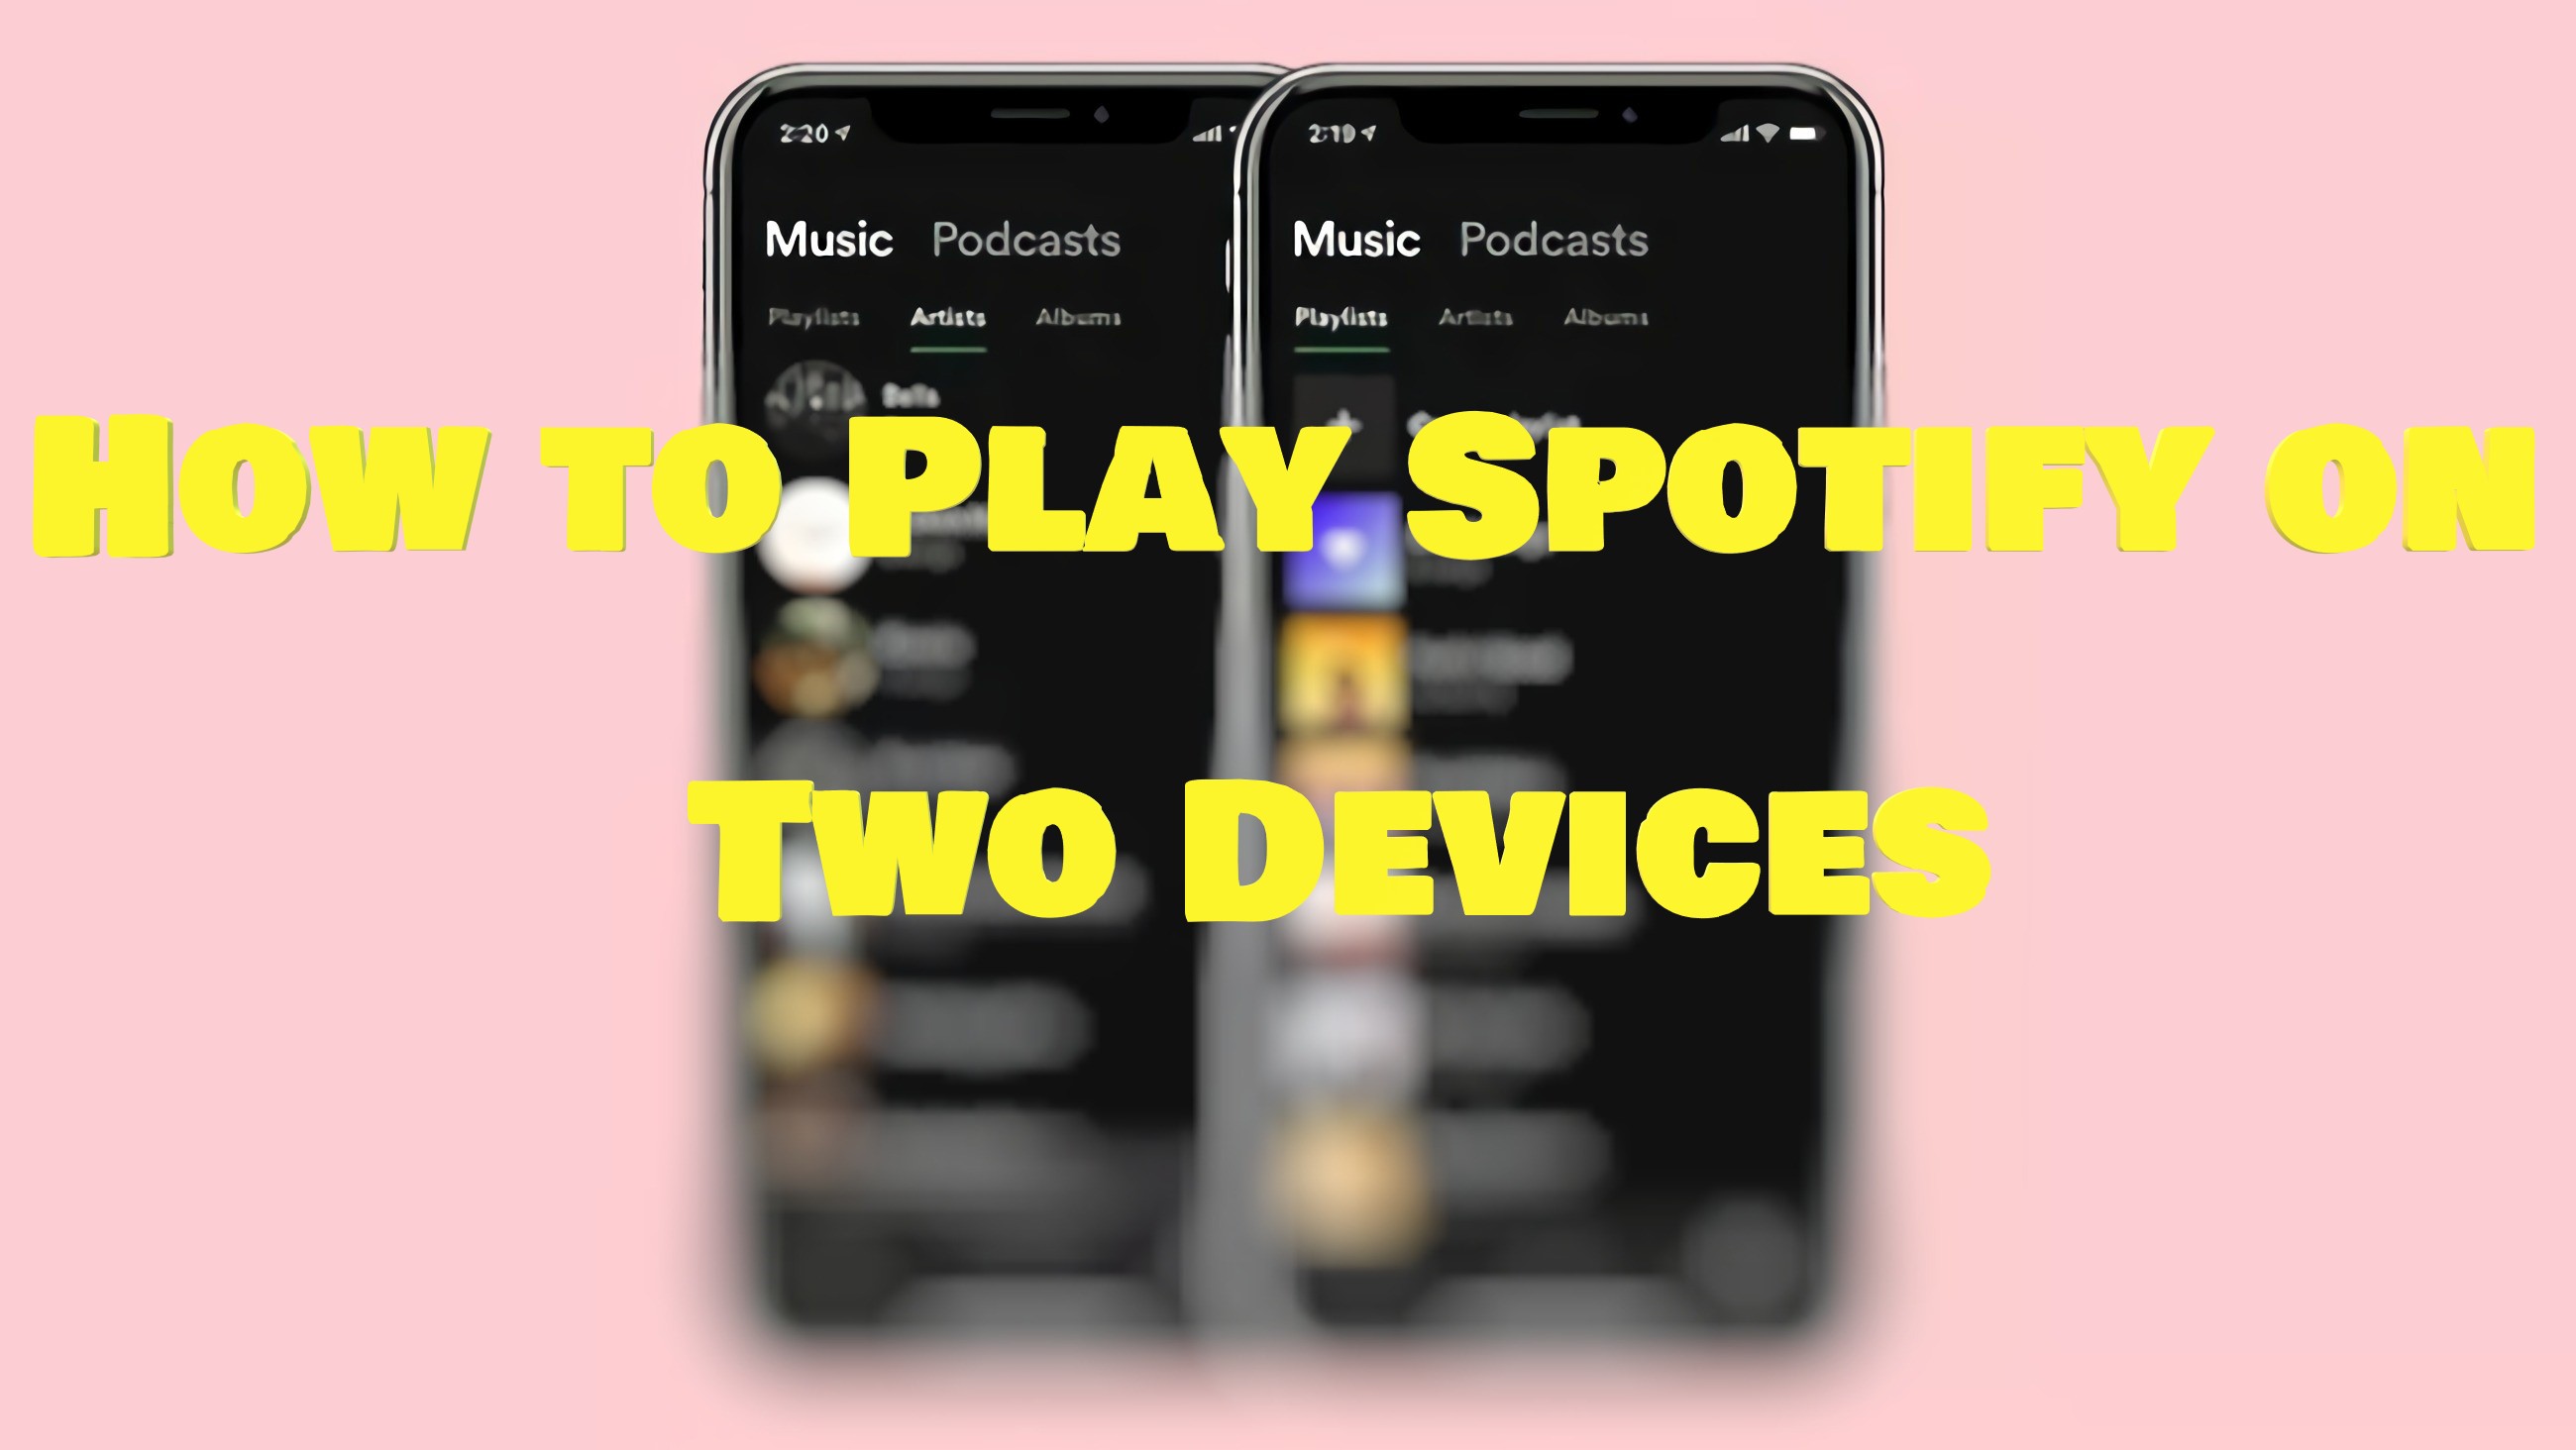 Can you use Spotify Premium on two devices?